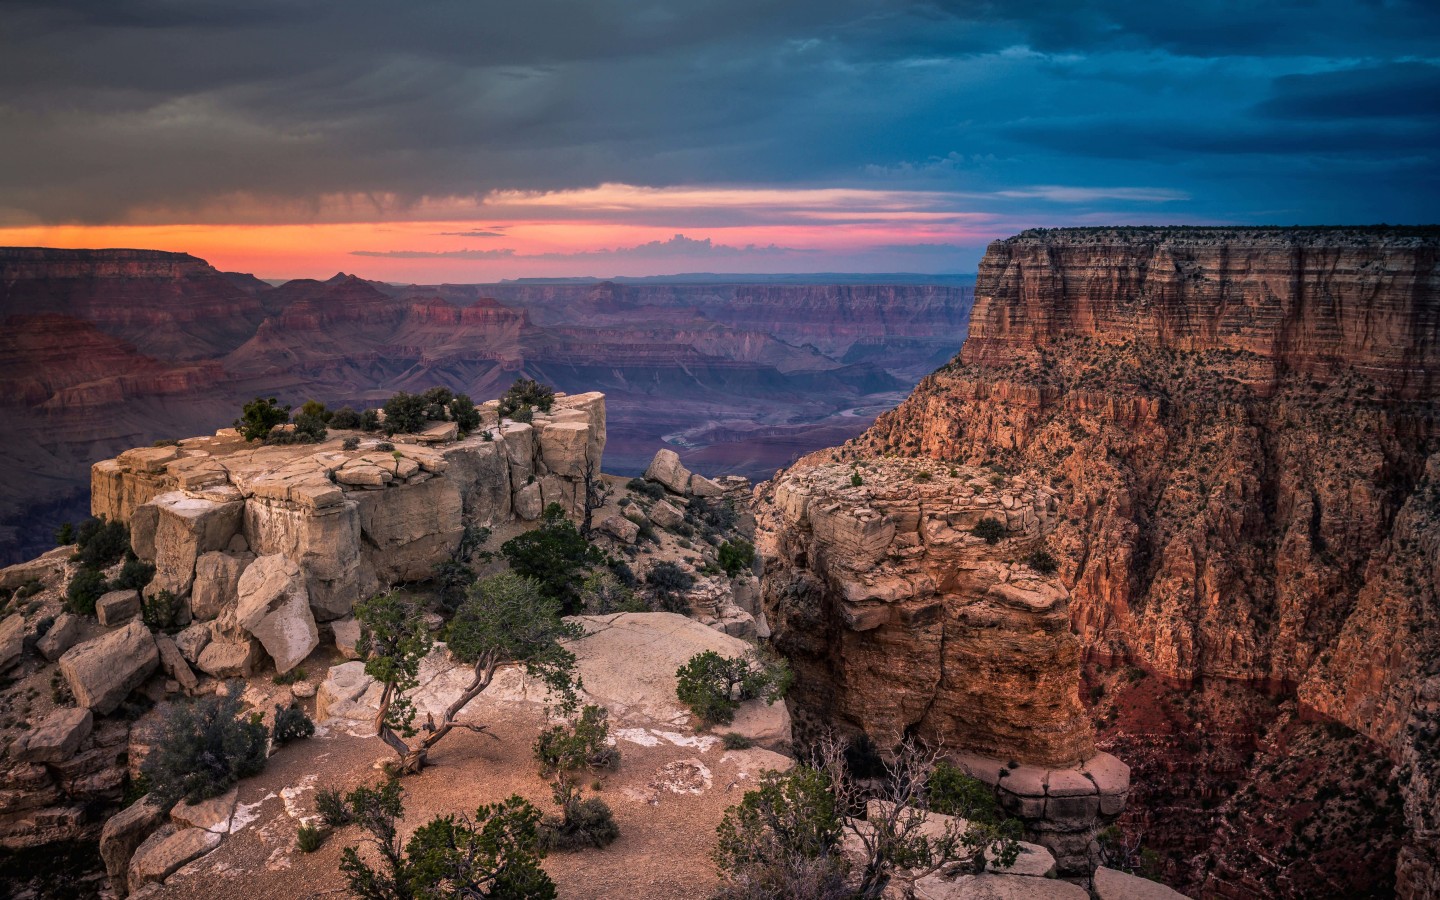 Sunset At The Grand Canyon Wallpaper for Desktop 1440x900